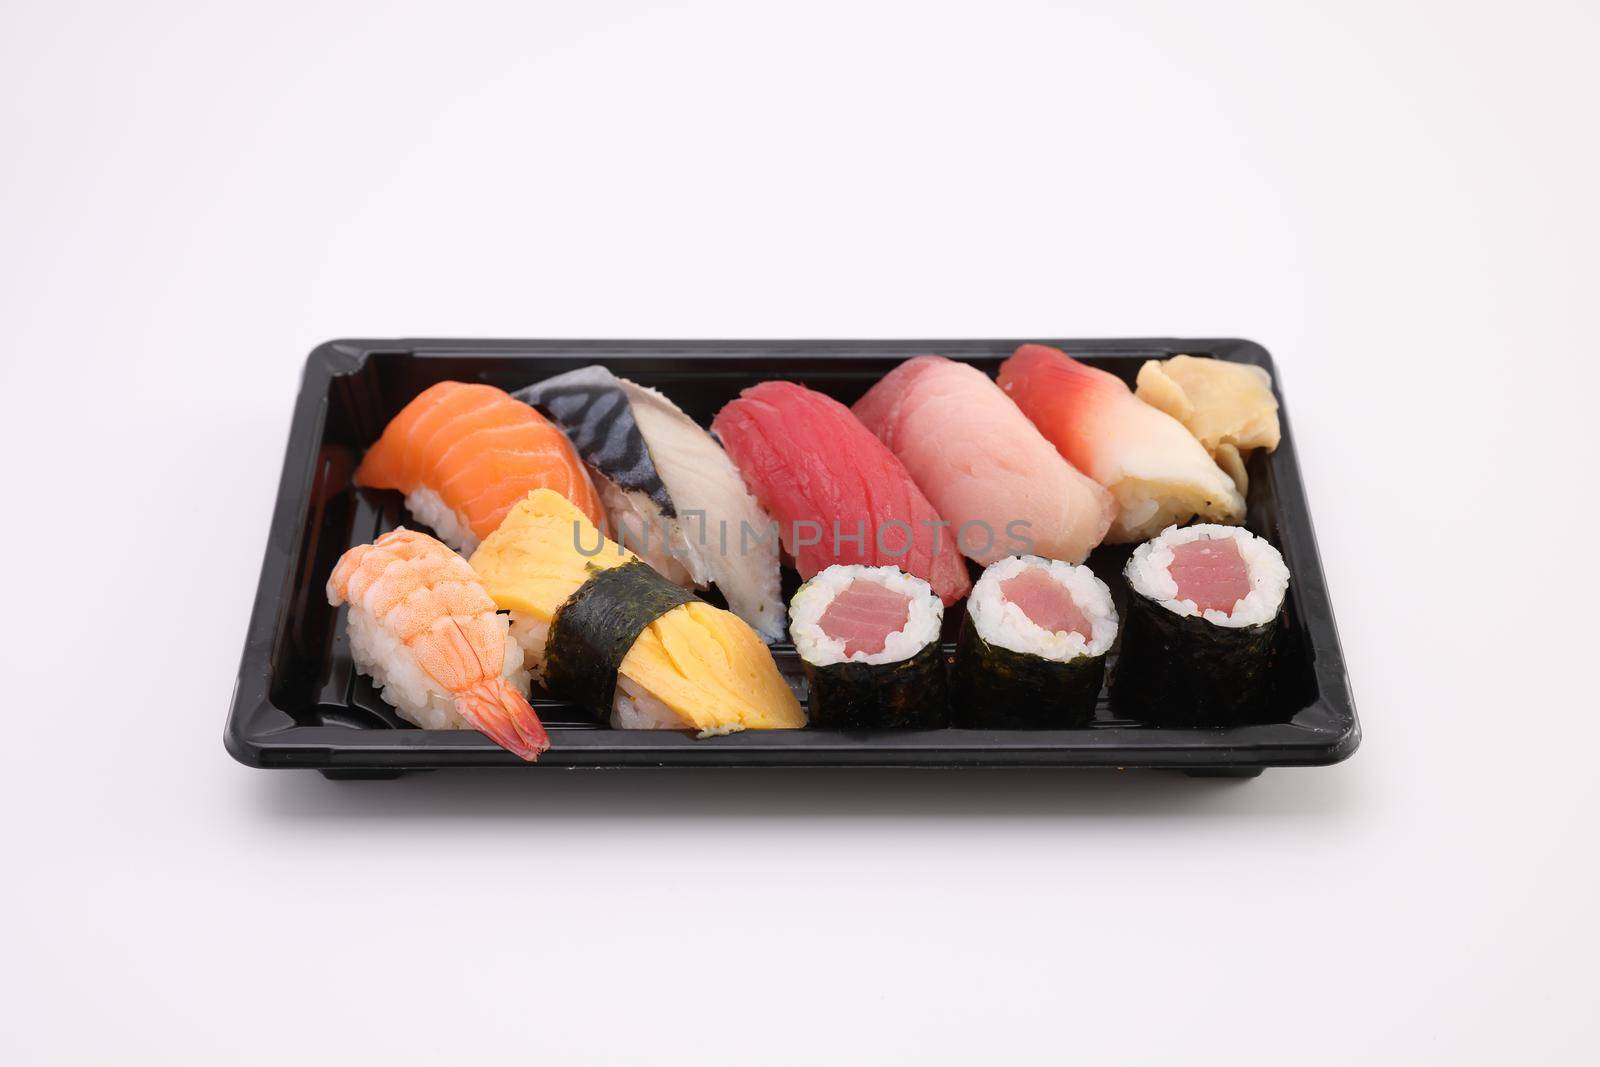 Sushi Set nigiri and sushi rolls with soy sauce and chopsticks Japanese food isolated in white background